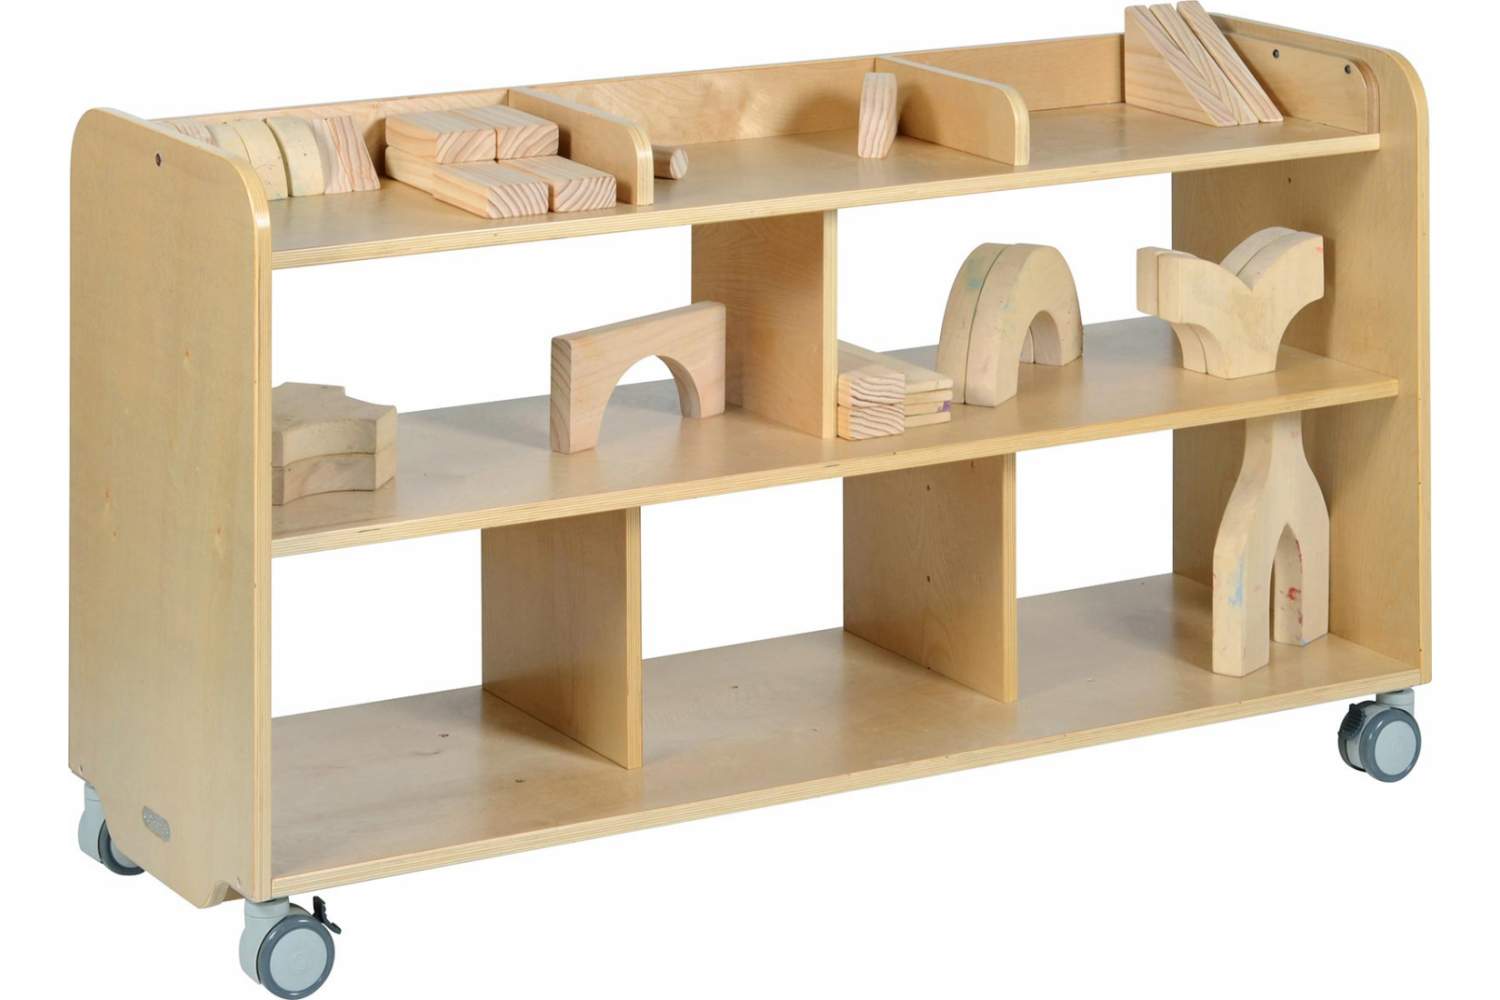 Wooden storage shelving for schools